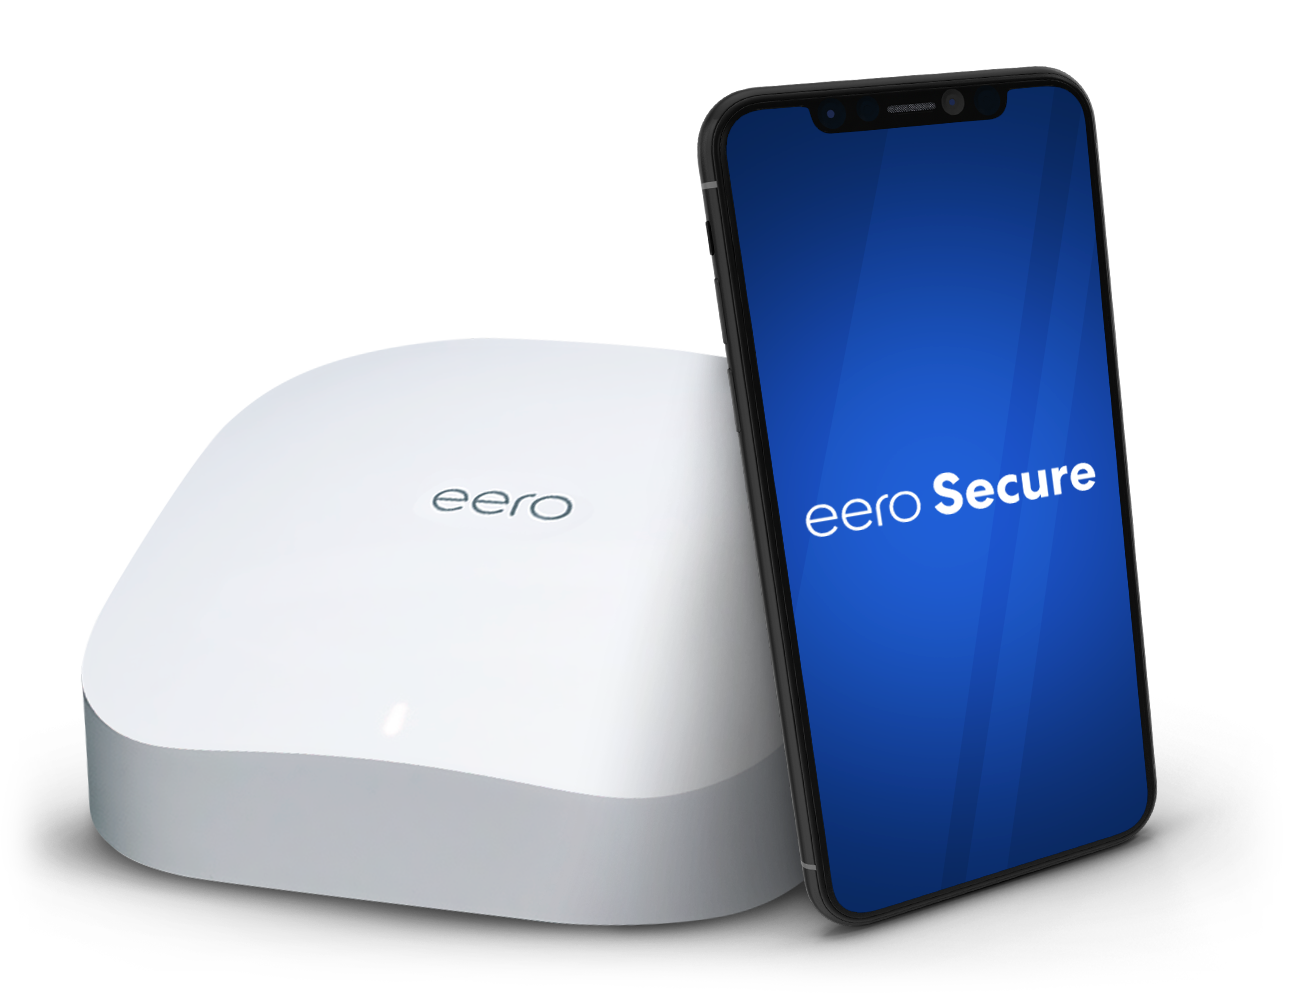 eero device and phone next to each other